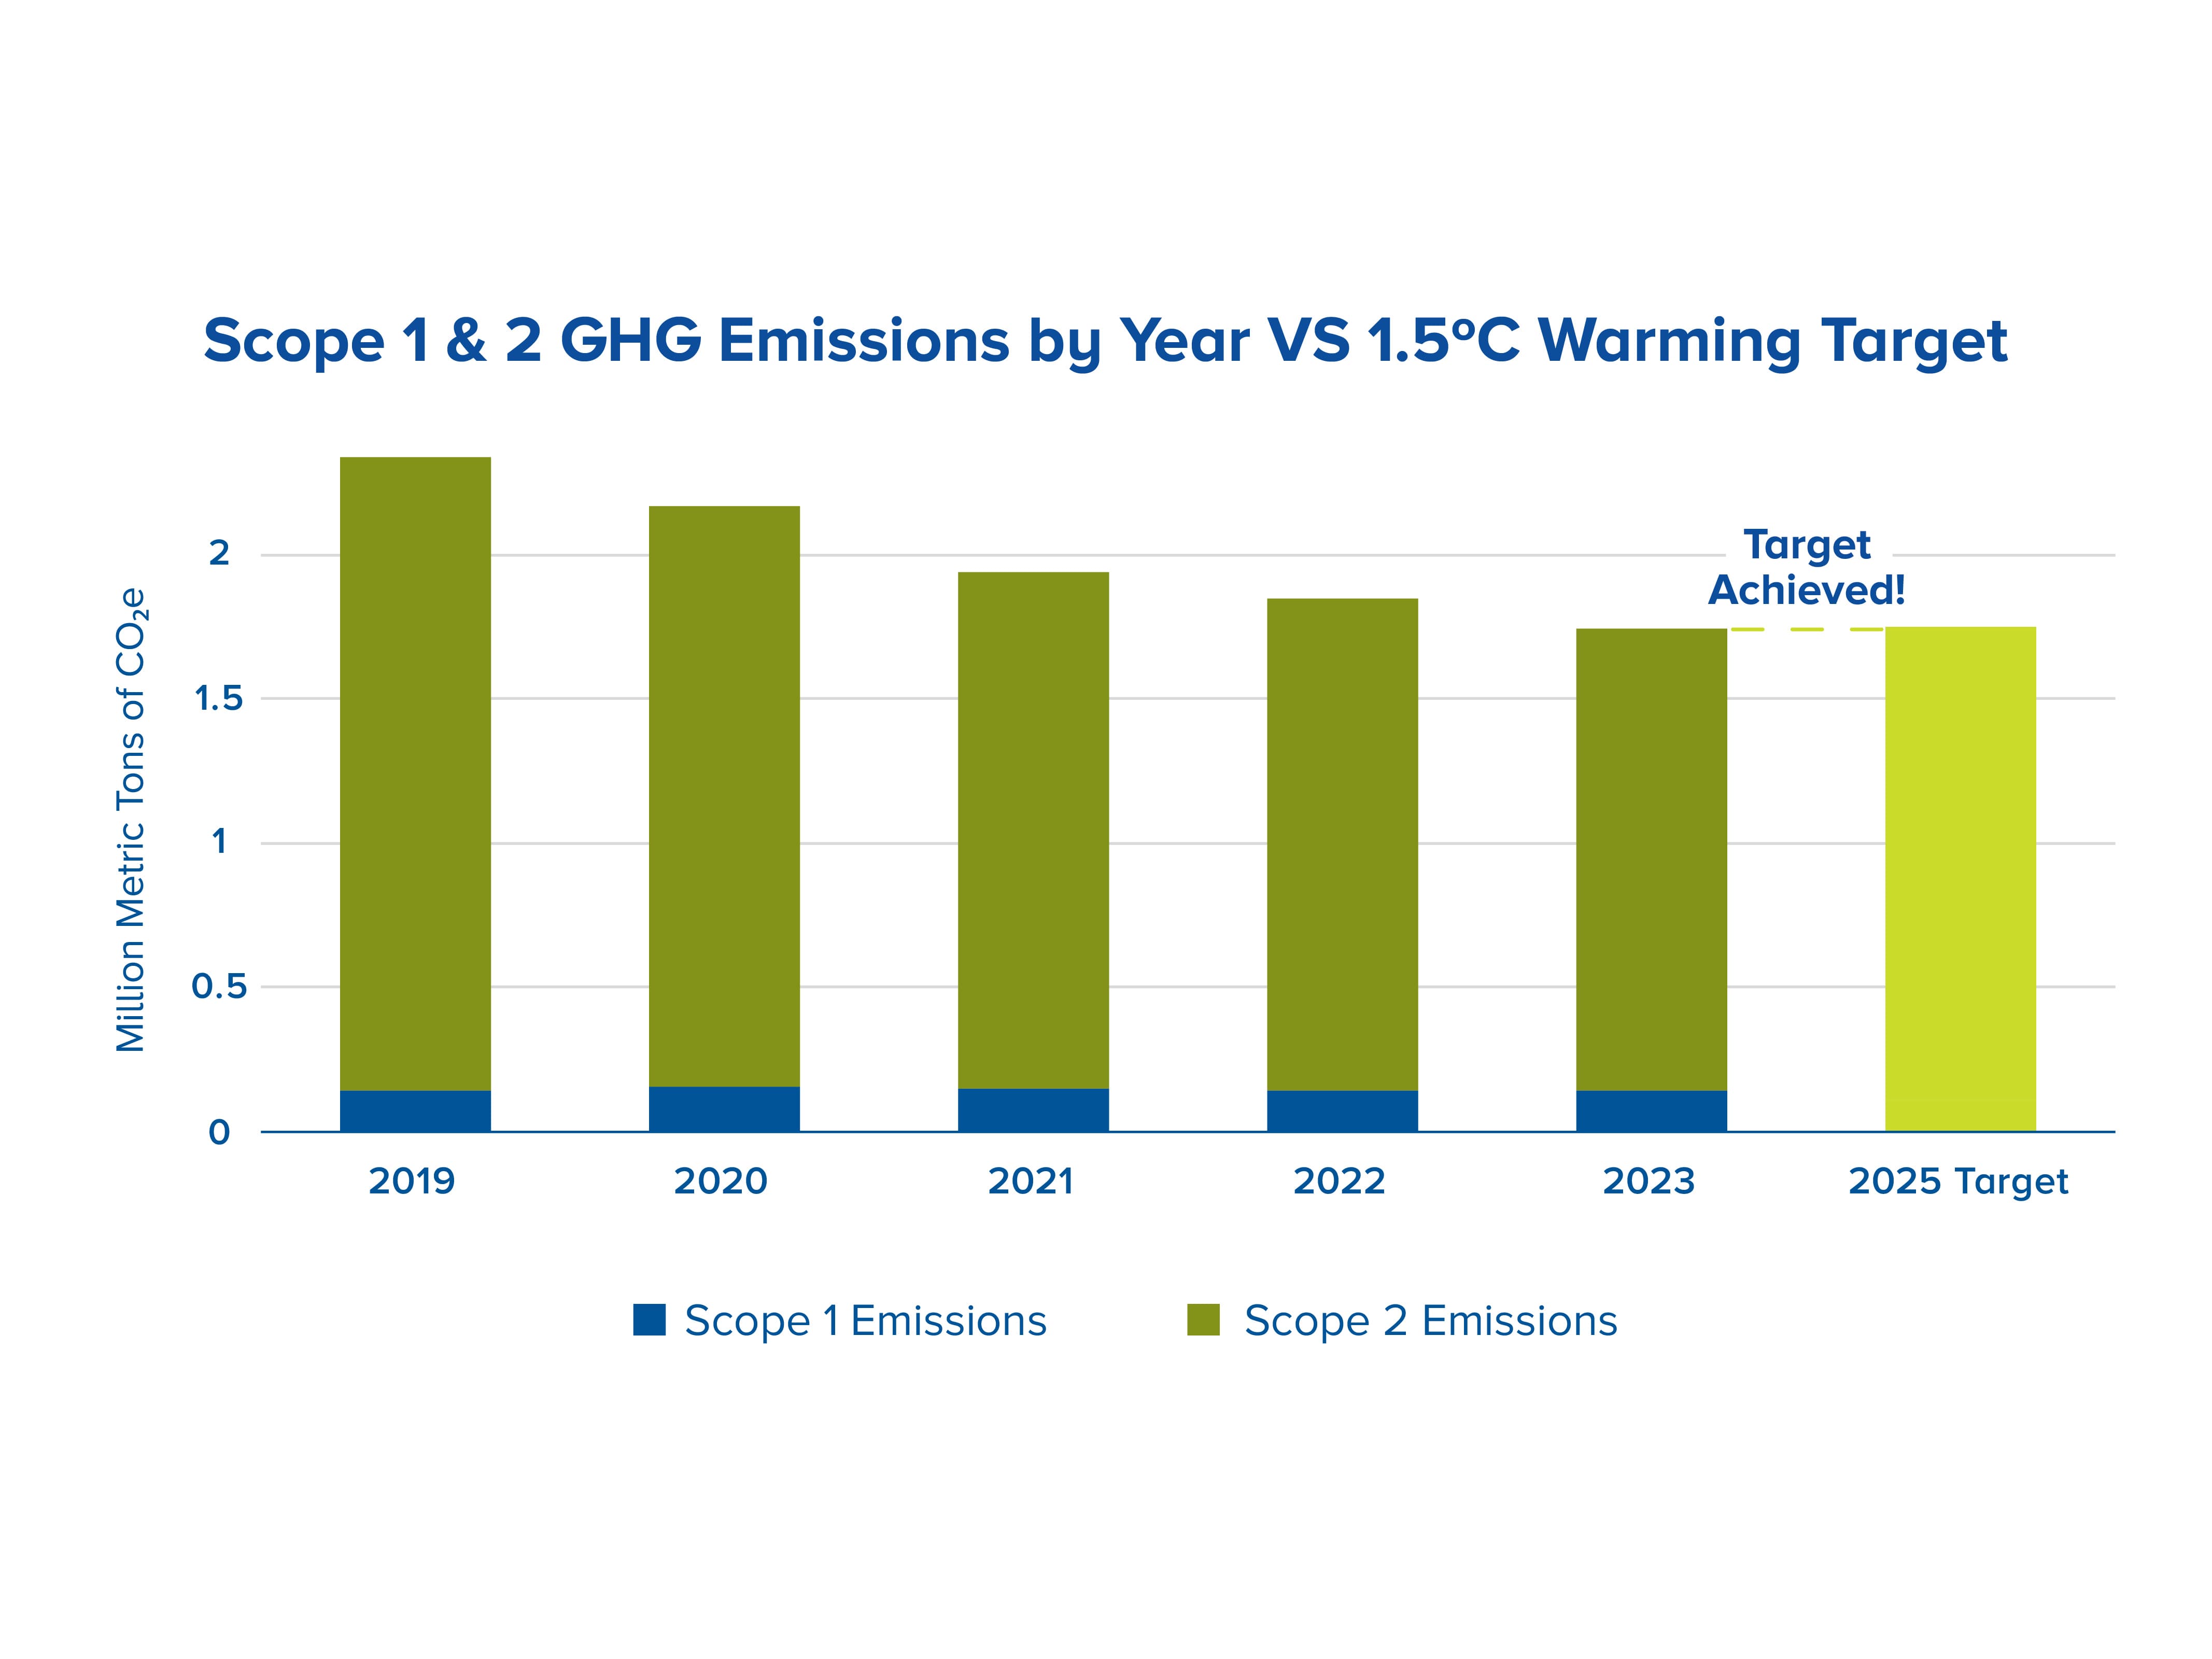 Scope 1 and 2 GHG Emissions by Year Versus Science-Based Target